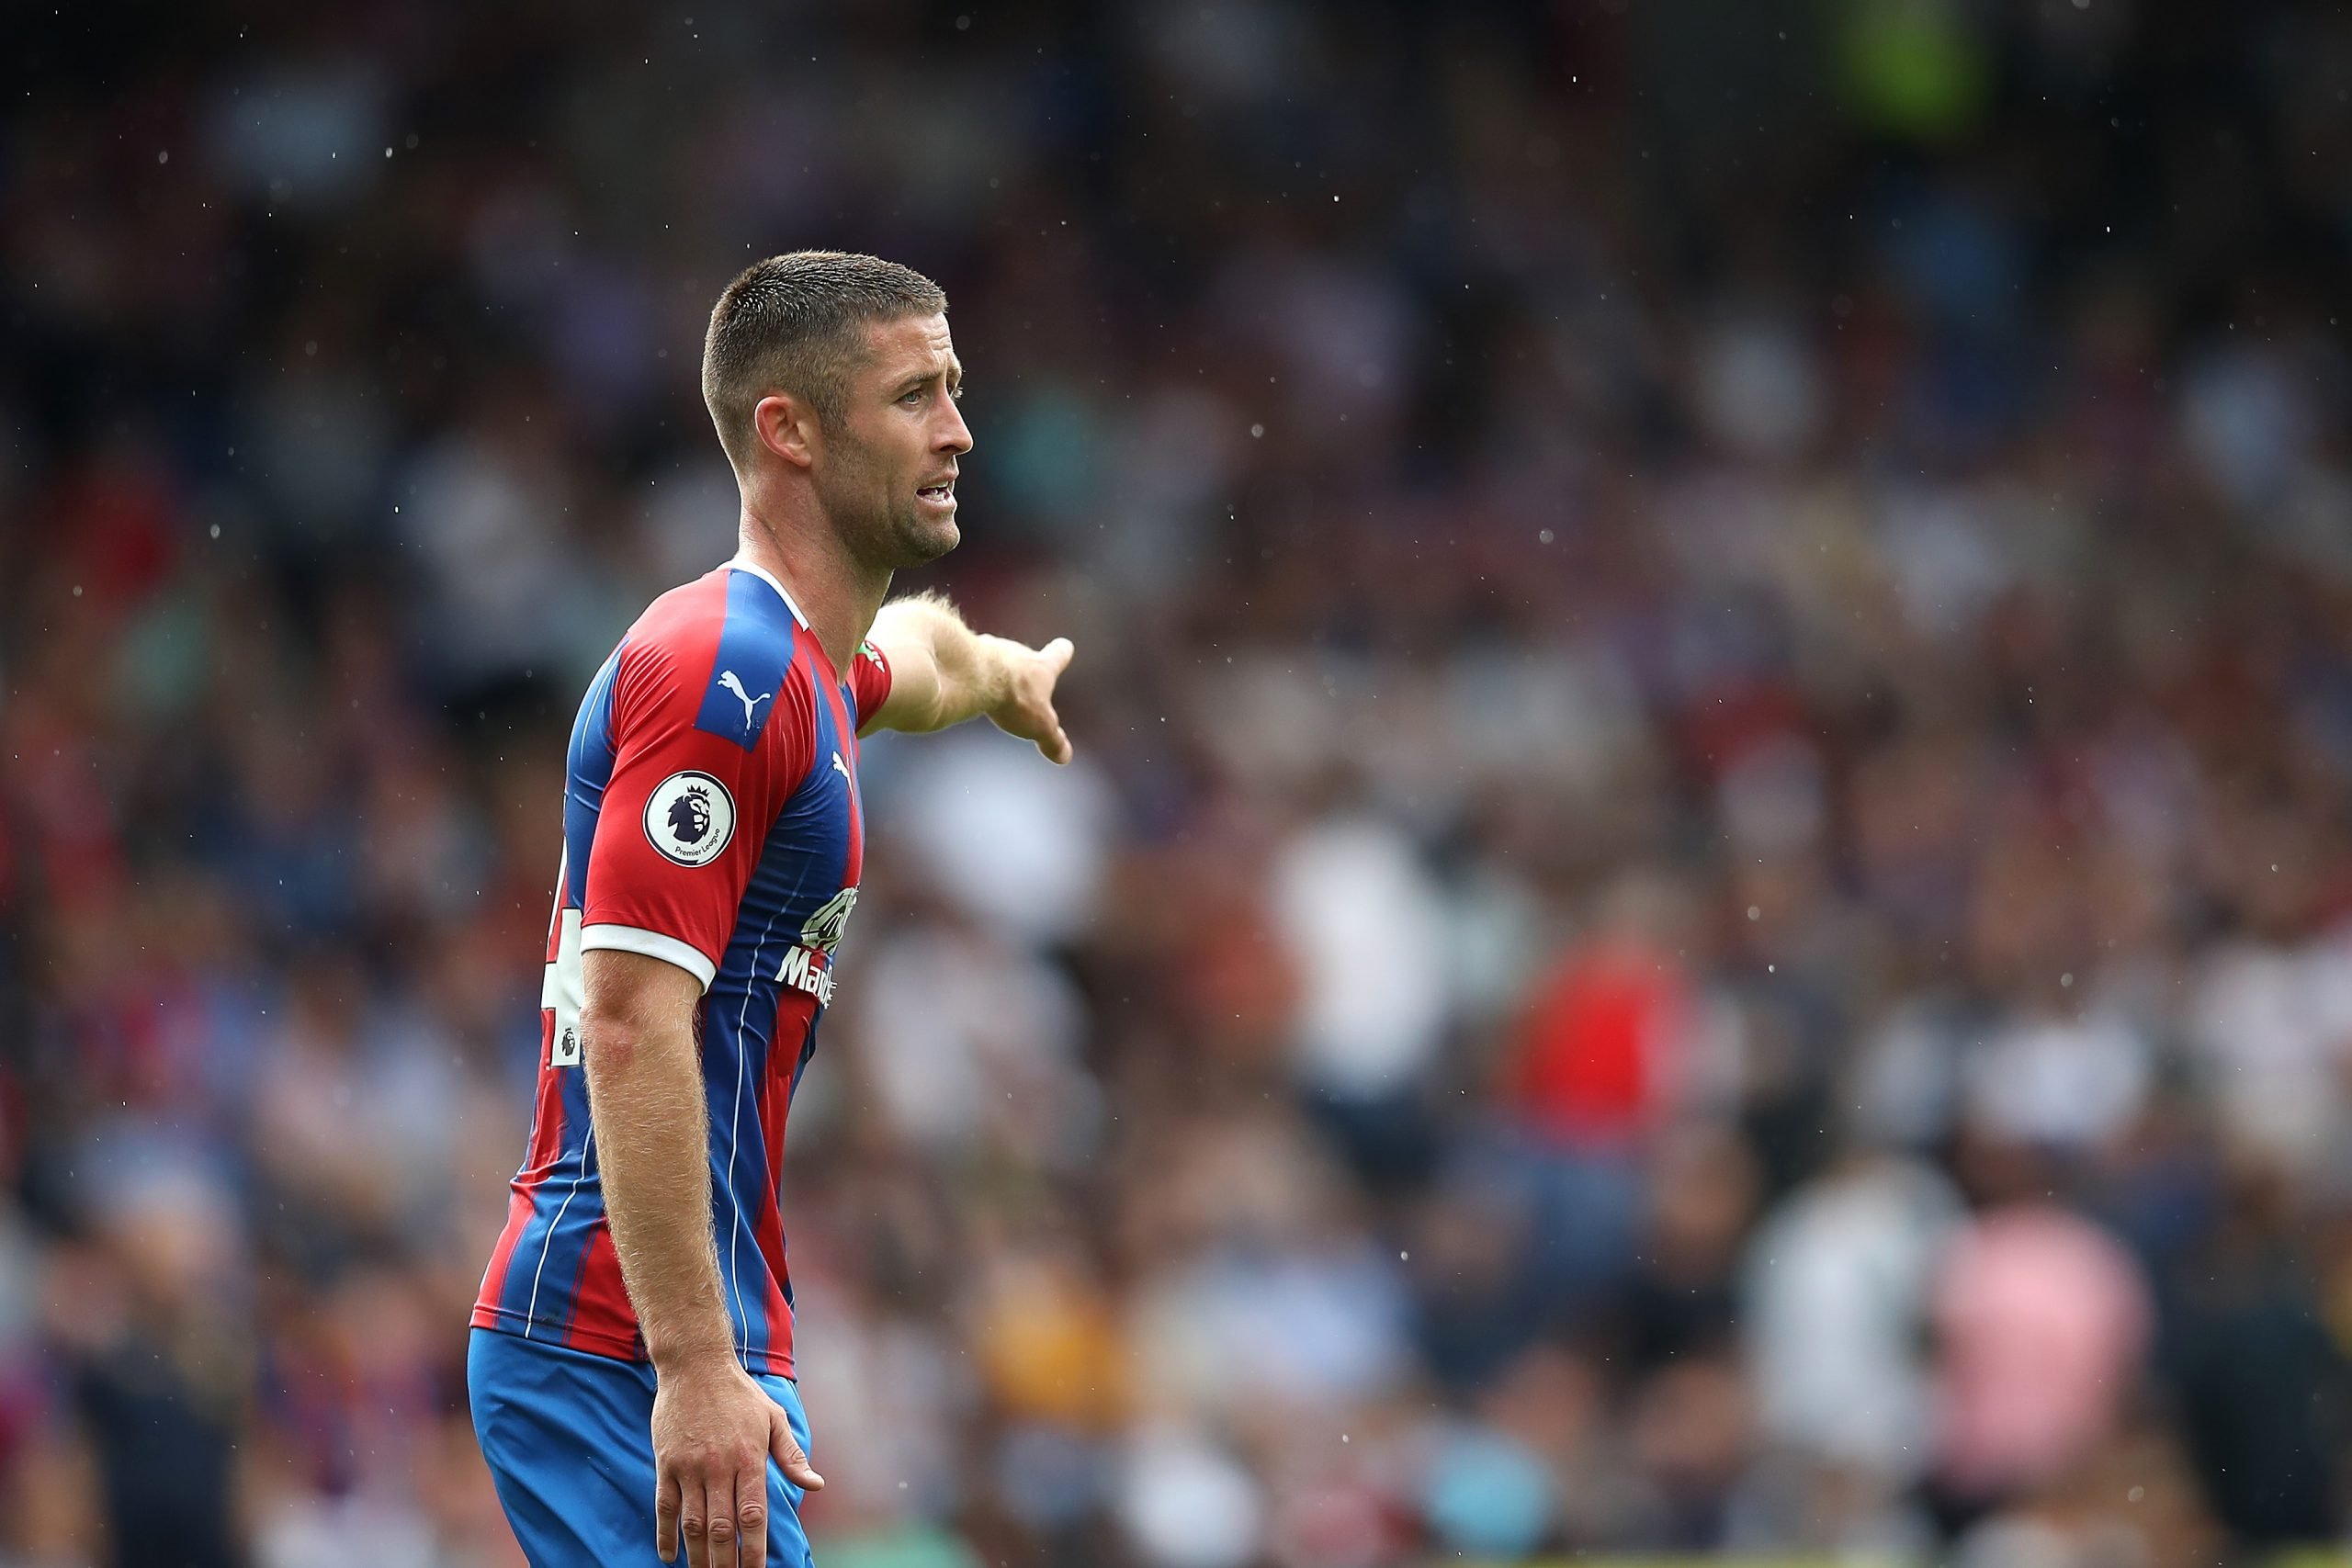 LONDON, ENGLAND - AUGUST 31: Gary Cahill of Crystal Palace in action during the Premier League match between Crystal Palace and Aston Villa at Selhurst Park on August 31, 2019 in London, United Kingdom. (Photo by Christopher Lee/Getty Images)